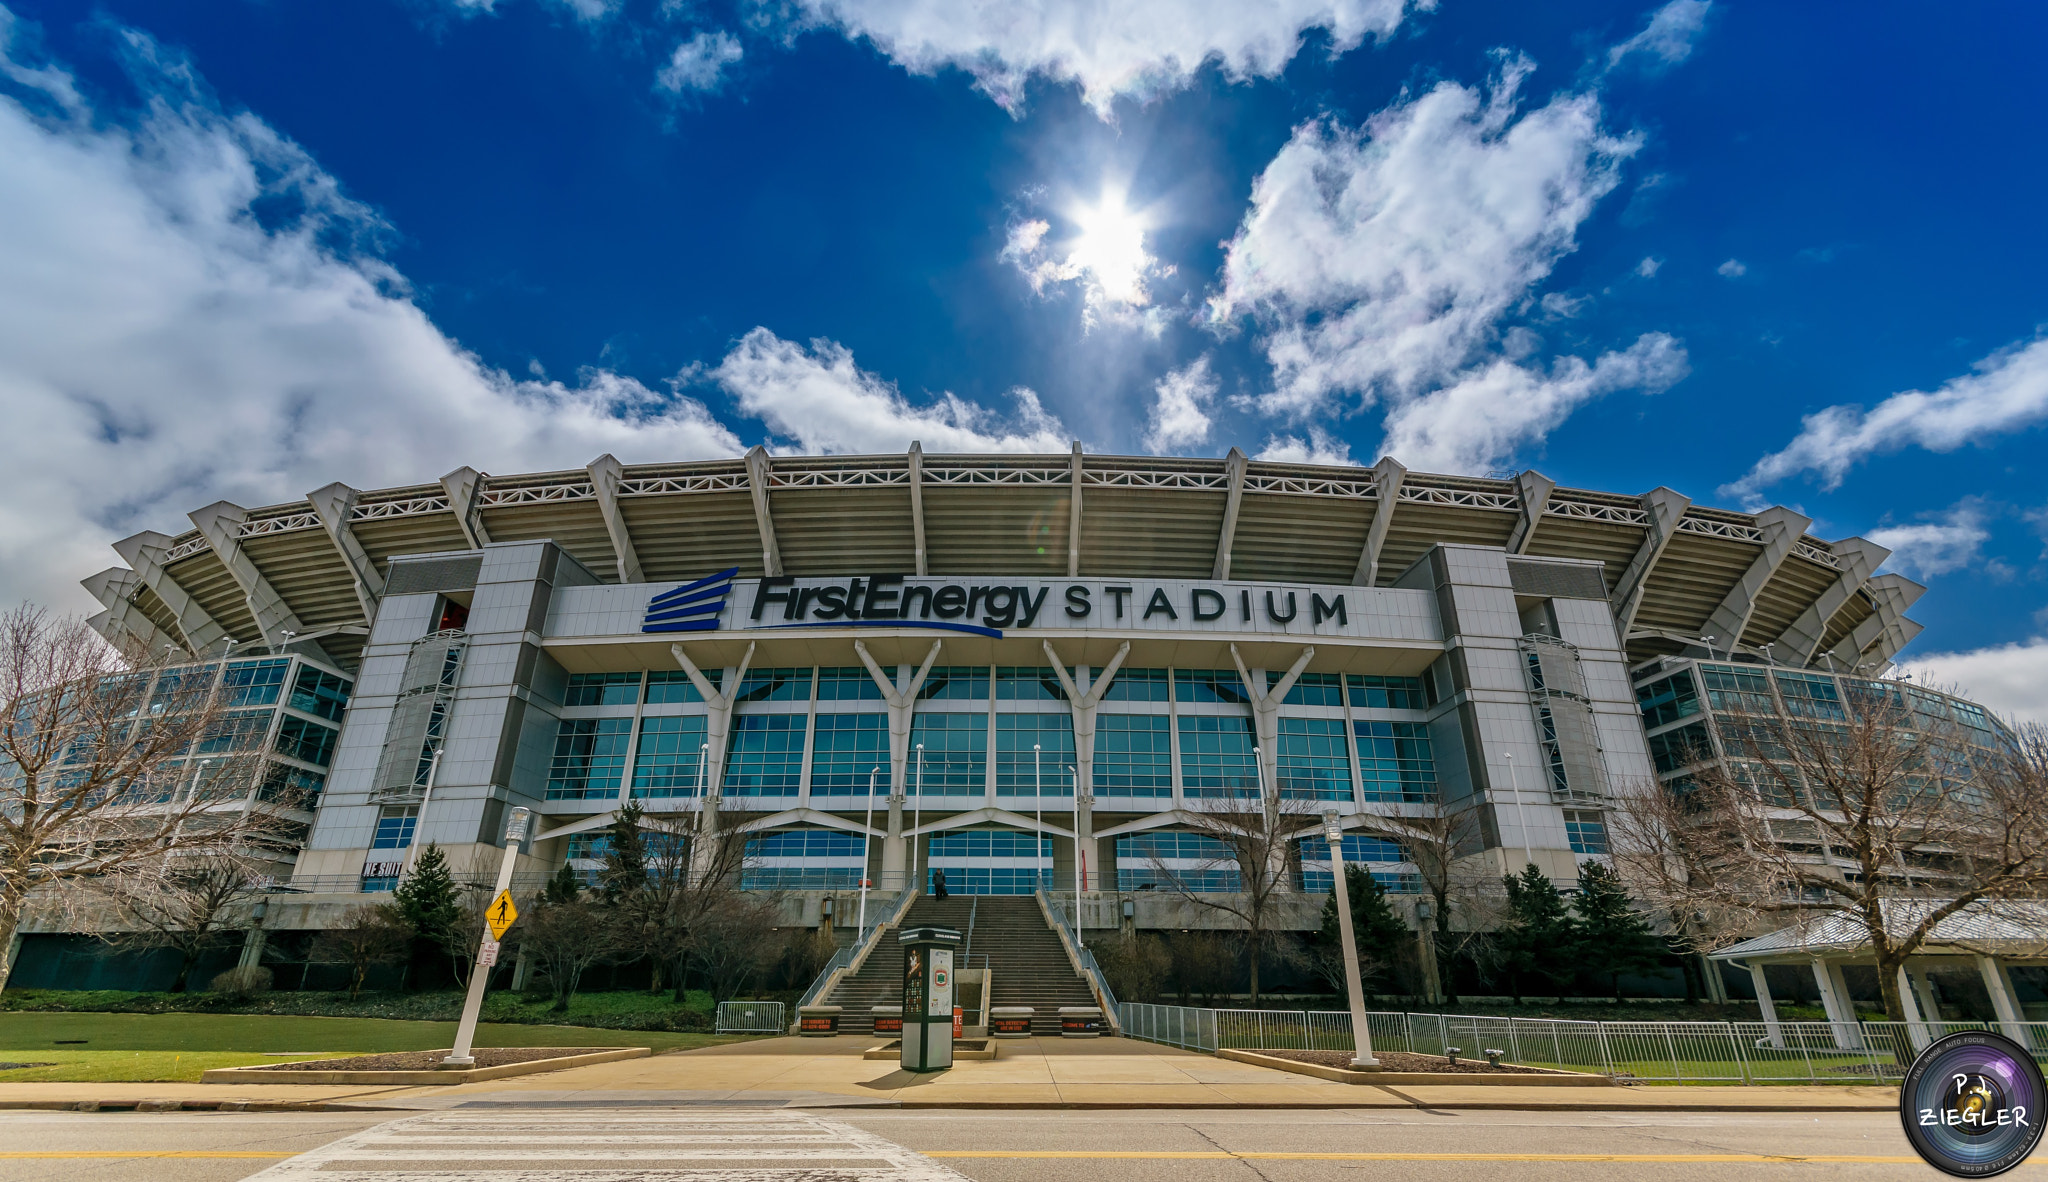 Nikon D5300 sample photo. Firstenergy stadium-home of the cleveland browns. photography